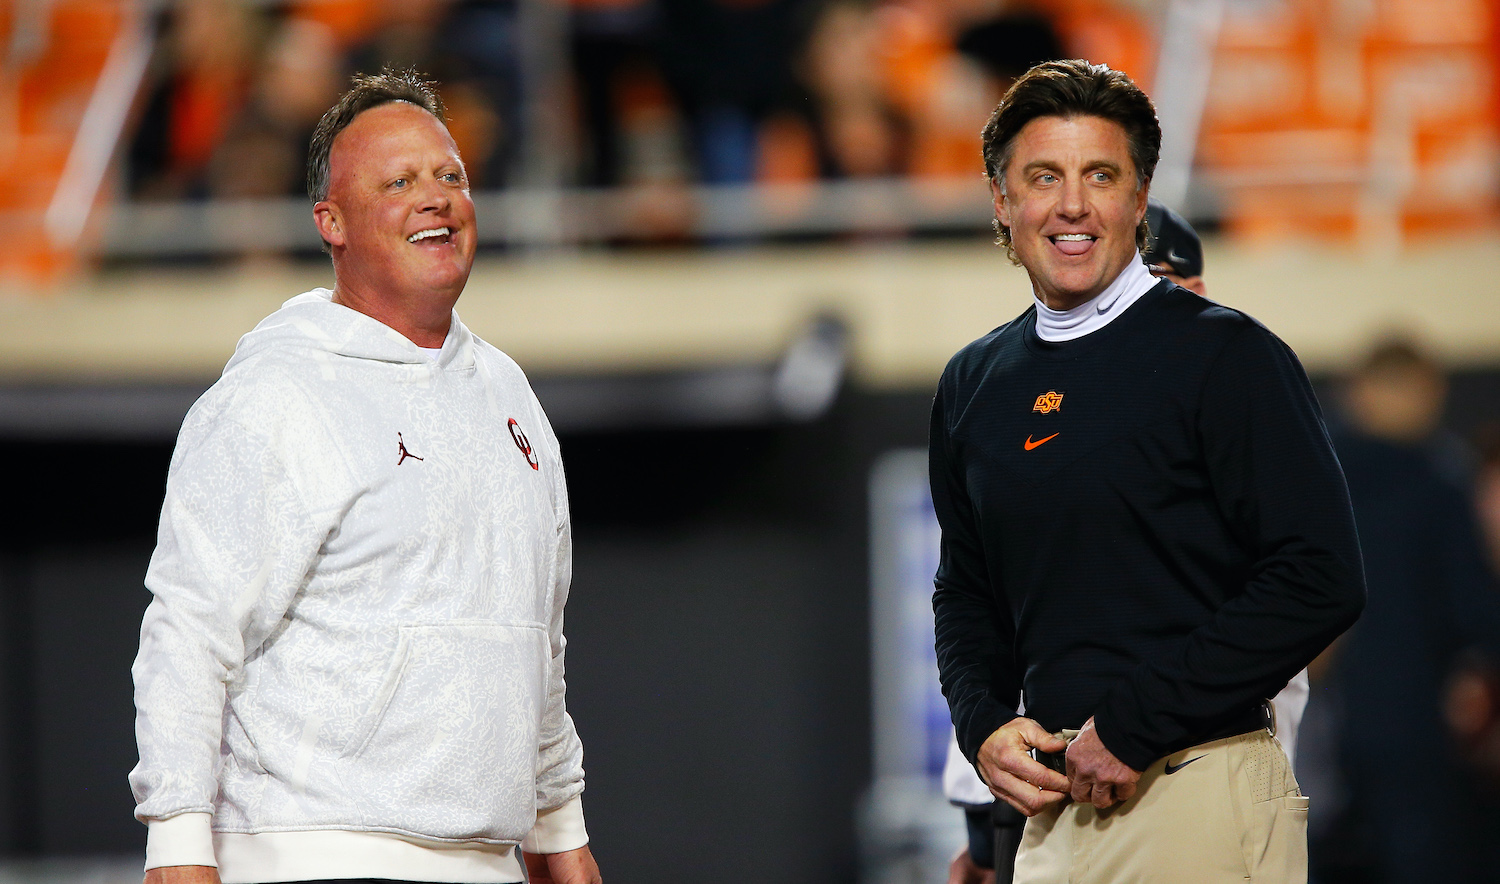 STILLWATER, OK - NOVEMBER 27: Offensive coordinator Cale Gundy of the Oklahoma Sooners greets his brother, head coach Mike Gundy of the Oklahoma State Cowboys, before their game at Boone Pickens Stadium on November 27, 2021 in Stillwater, Oklahoma. (Photo by Brian Bahr/Getty Images)